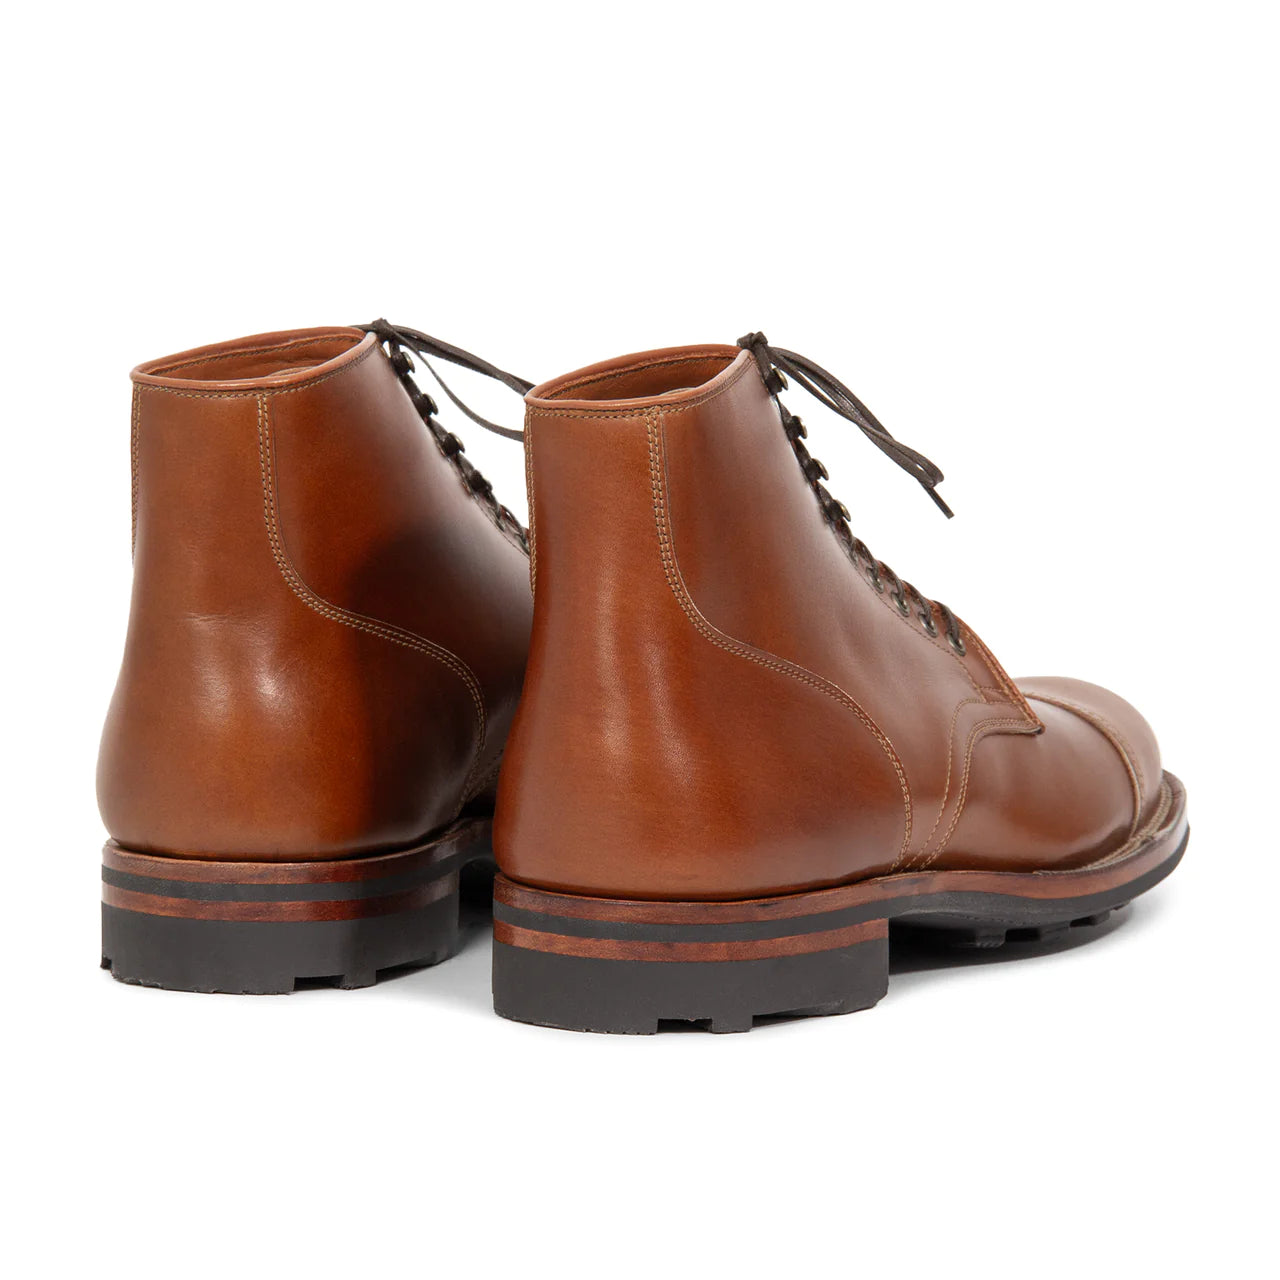 Viberg Service Boot 2030 - Annonay Tan French Vocalou